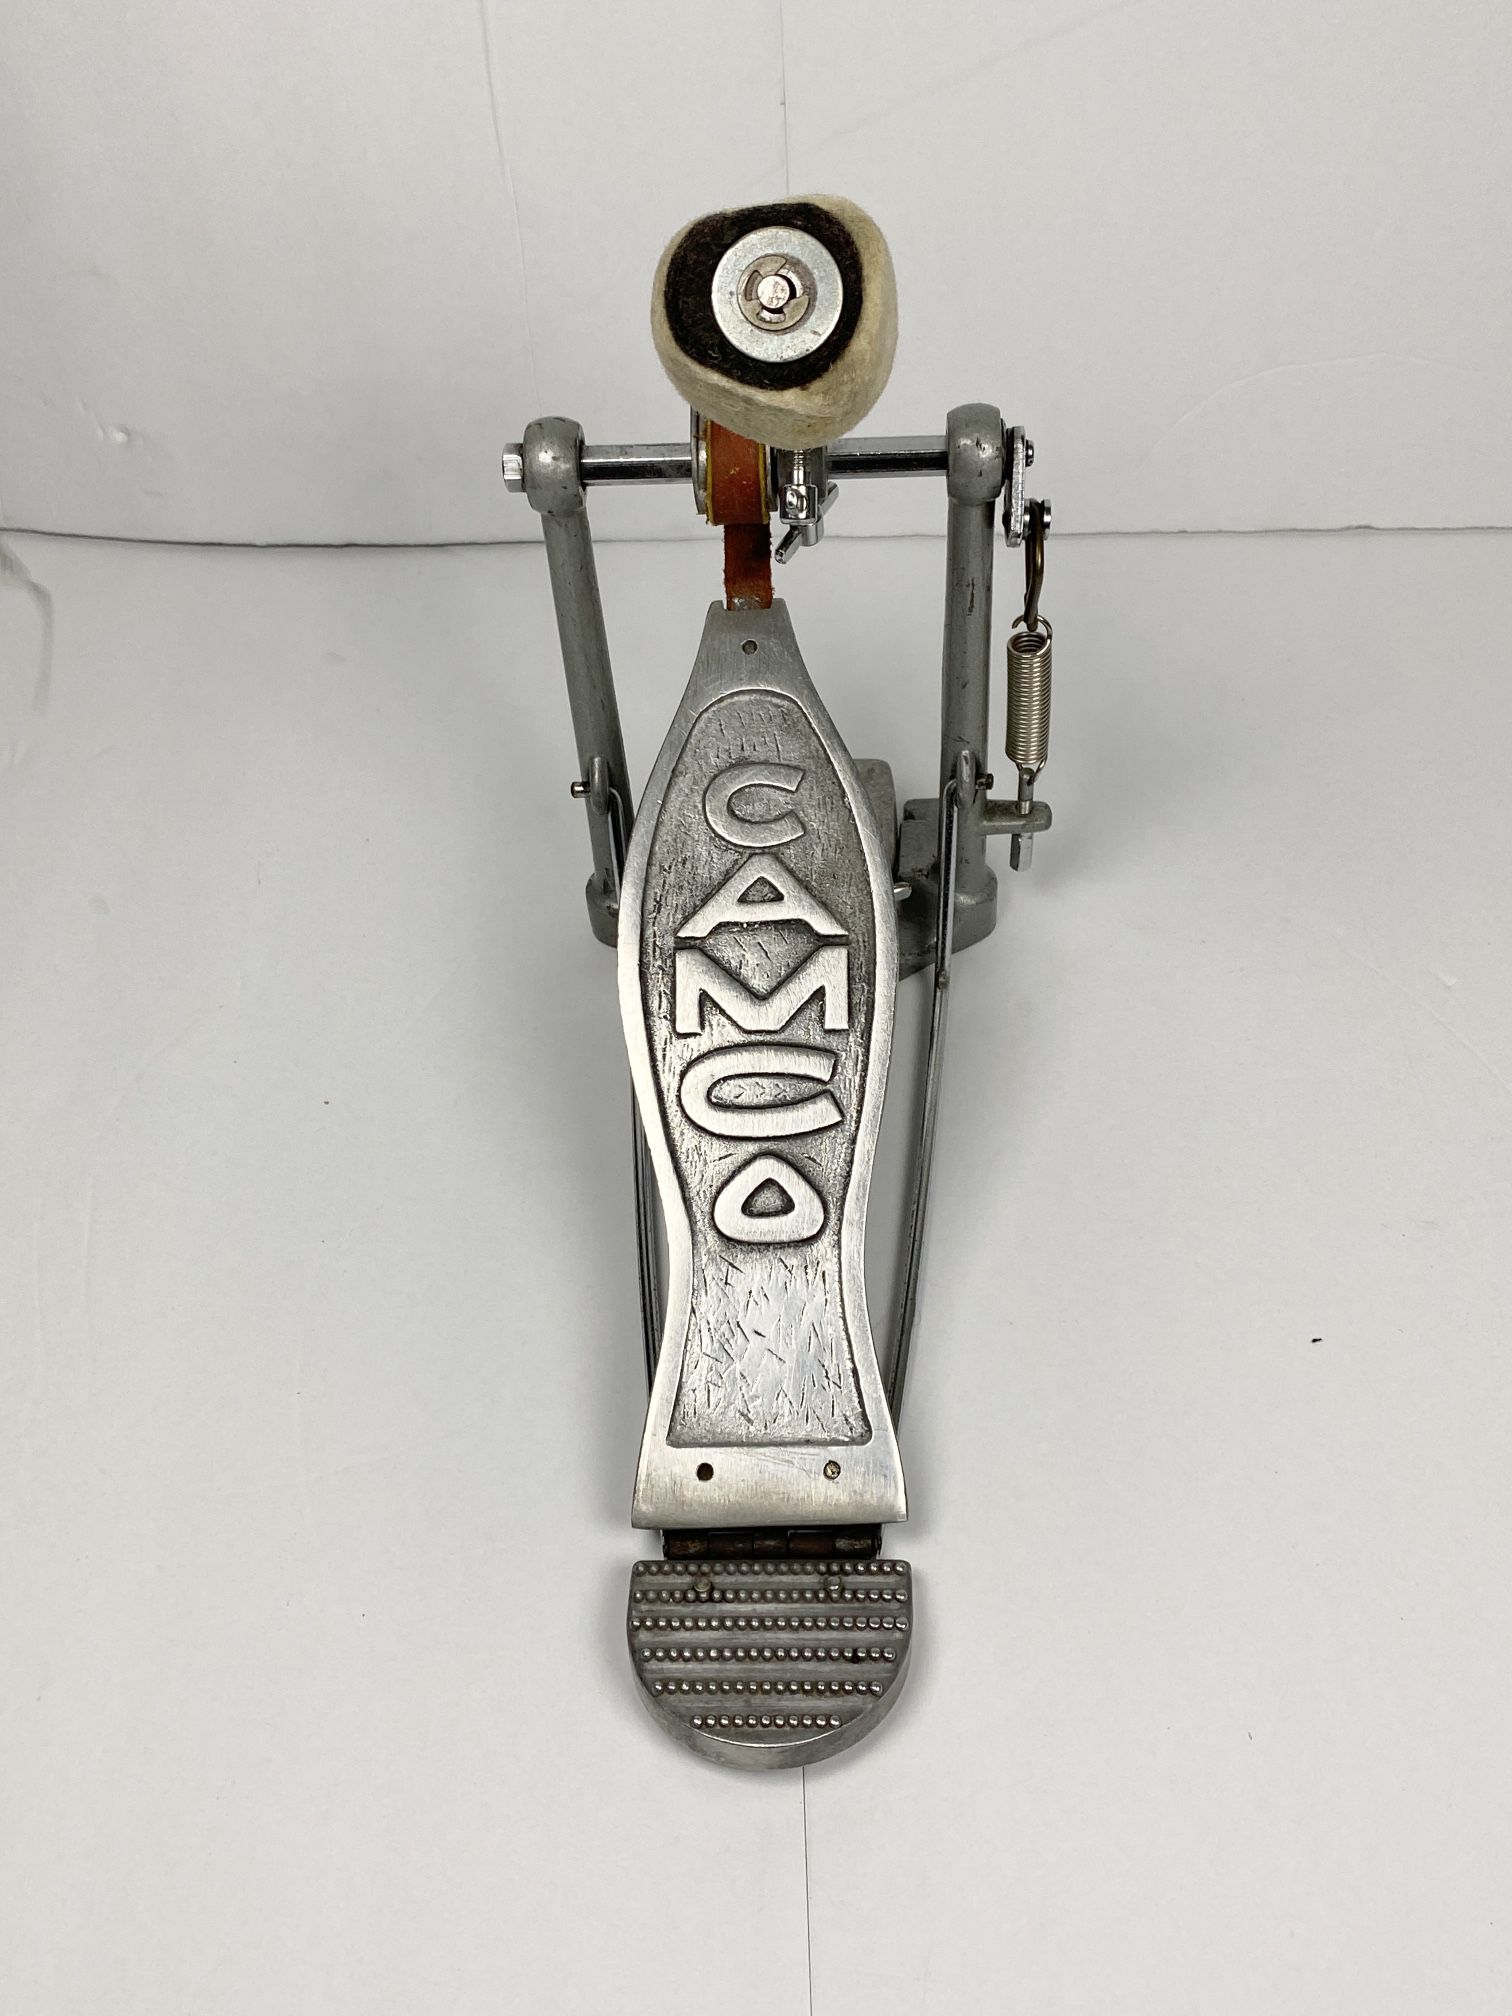 Vintage Camco No. 5000 Deluxe Bass Drum Pedal 02